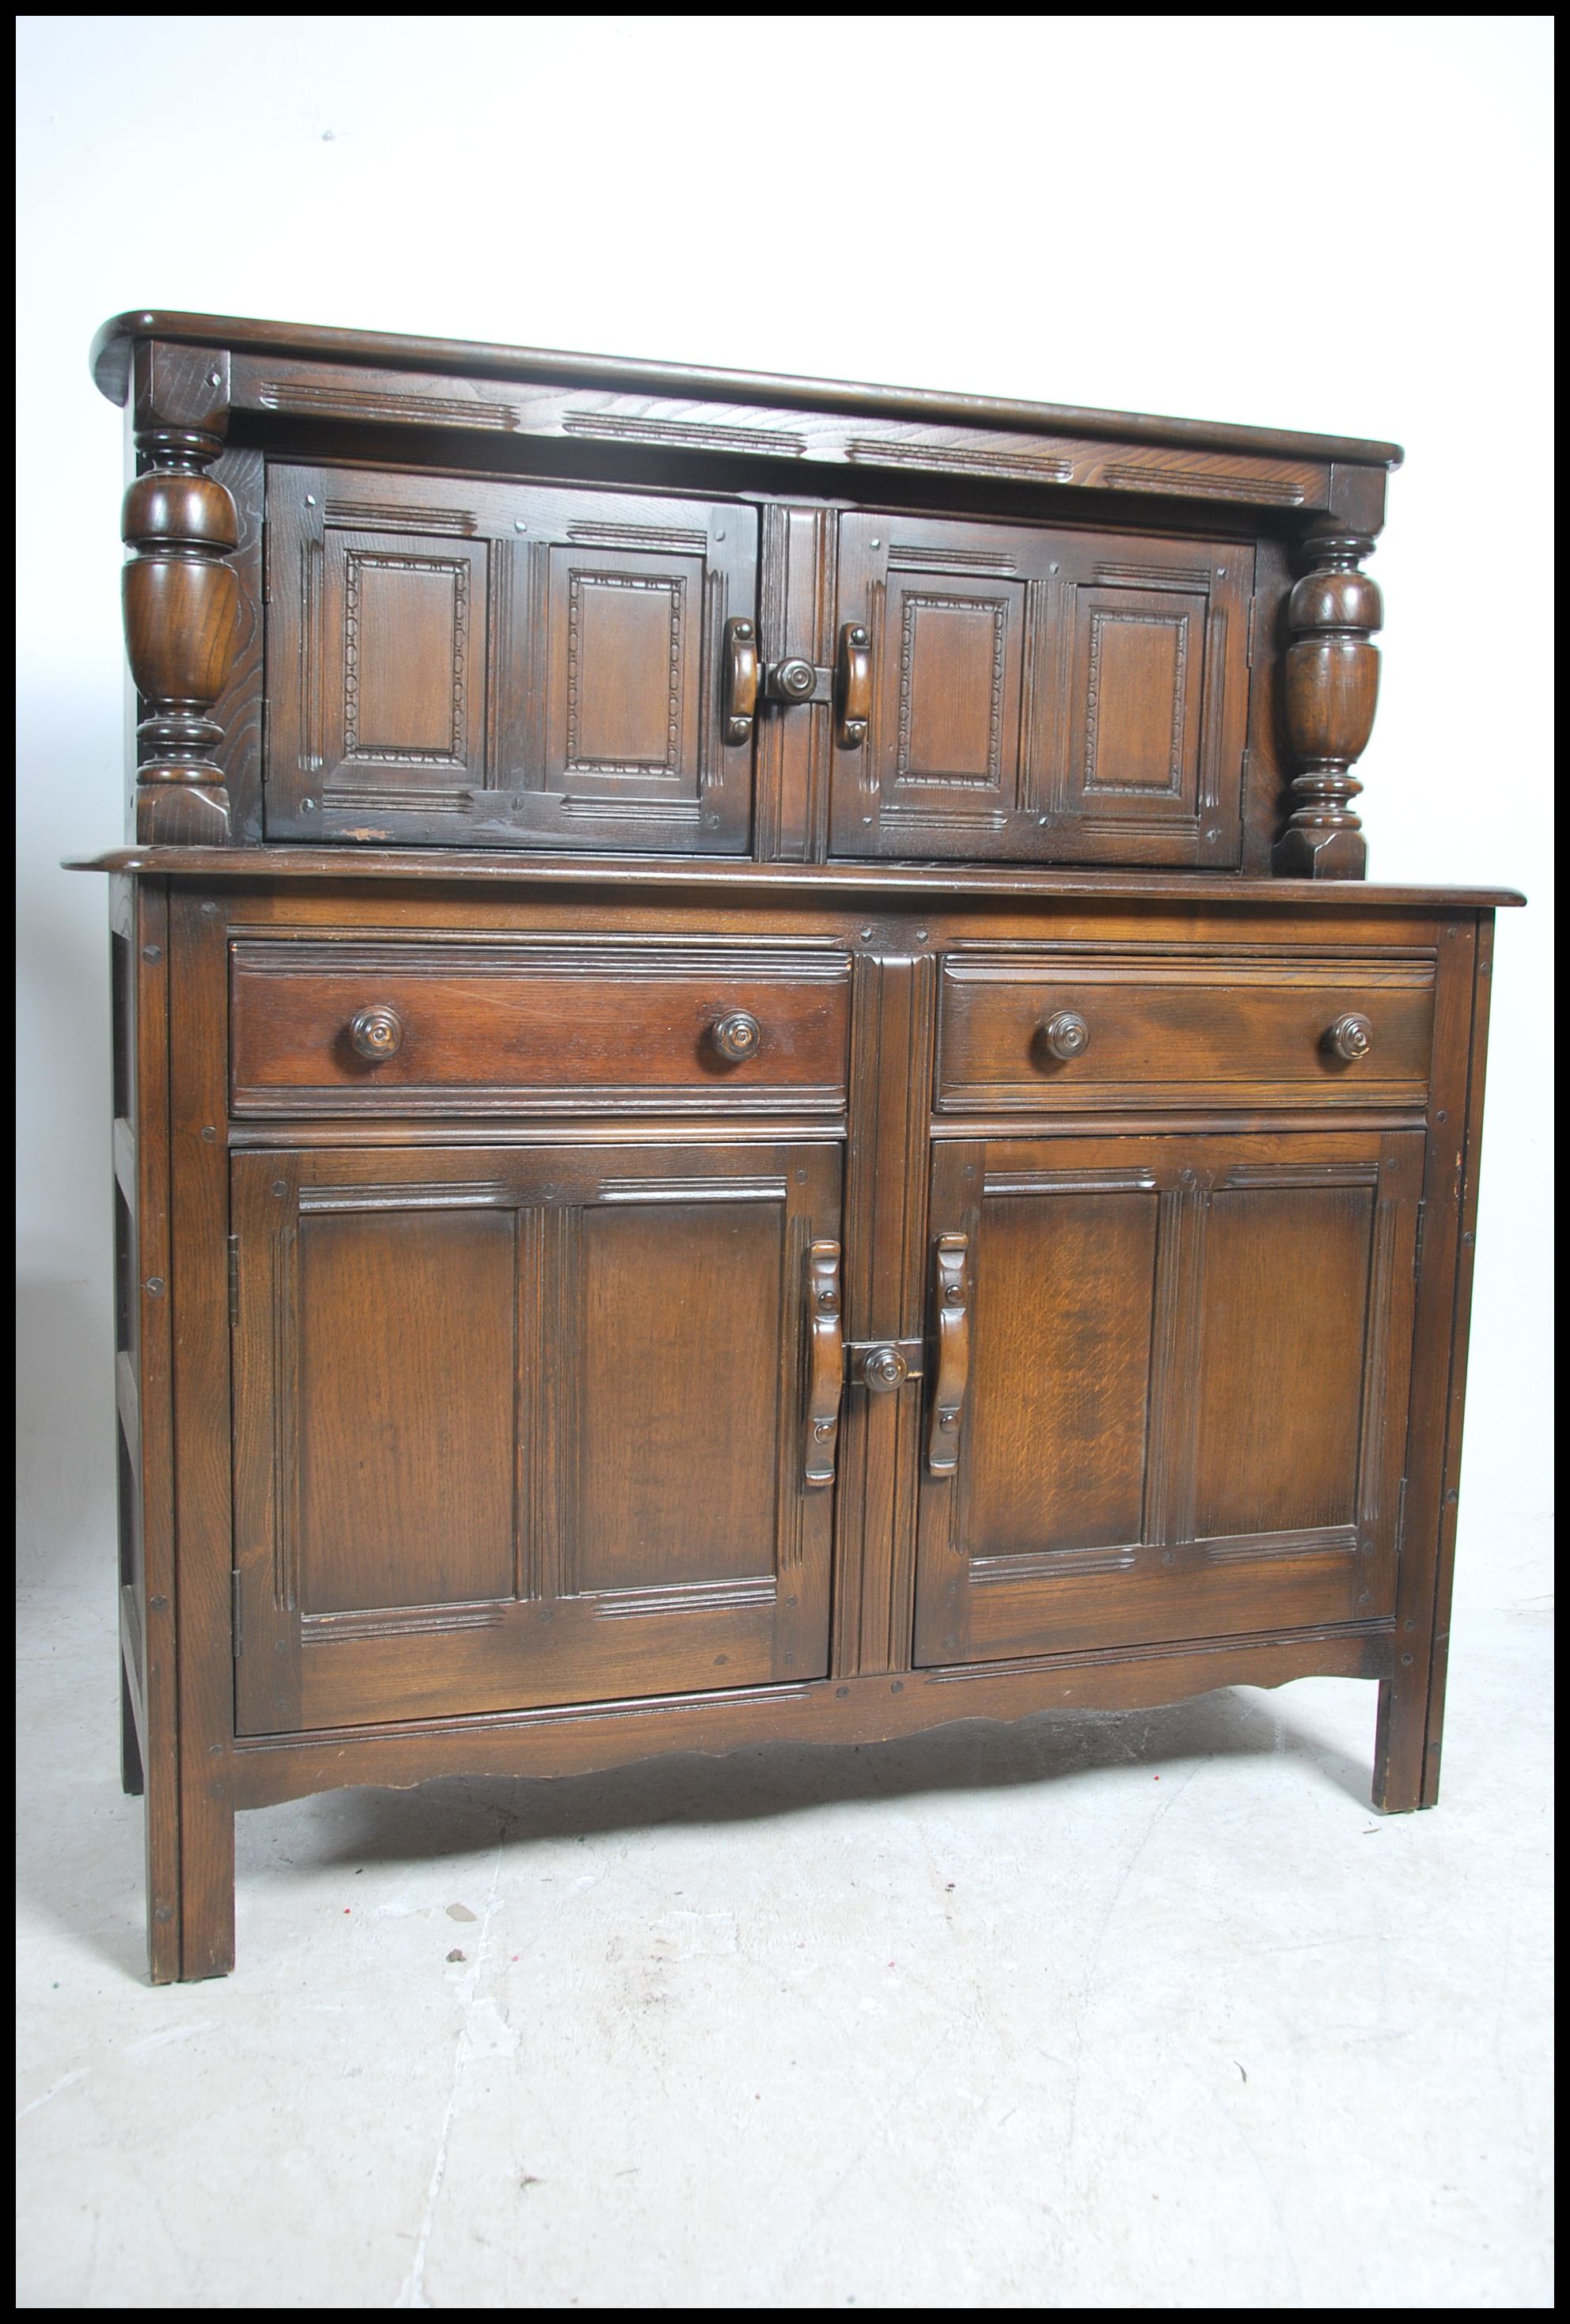 A 20th century Ercol court cupboard in beech and e